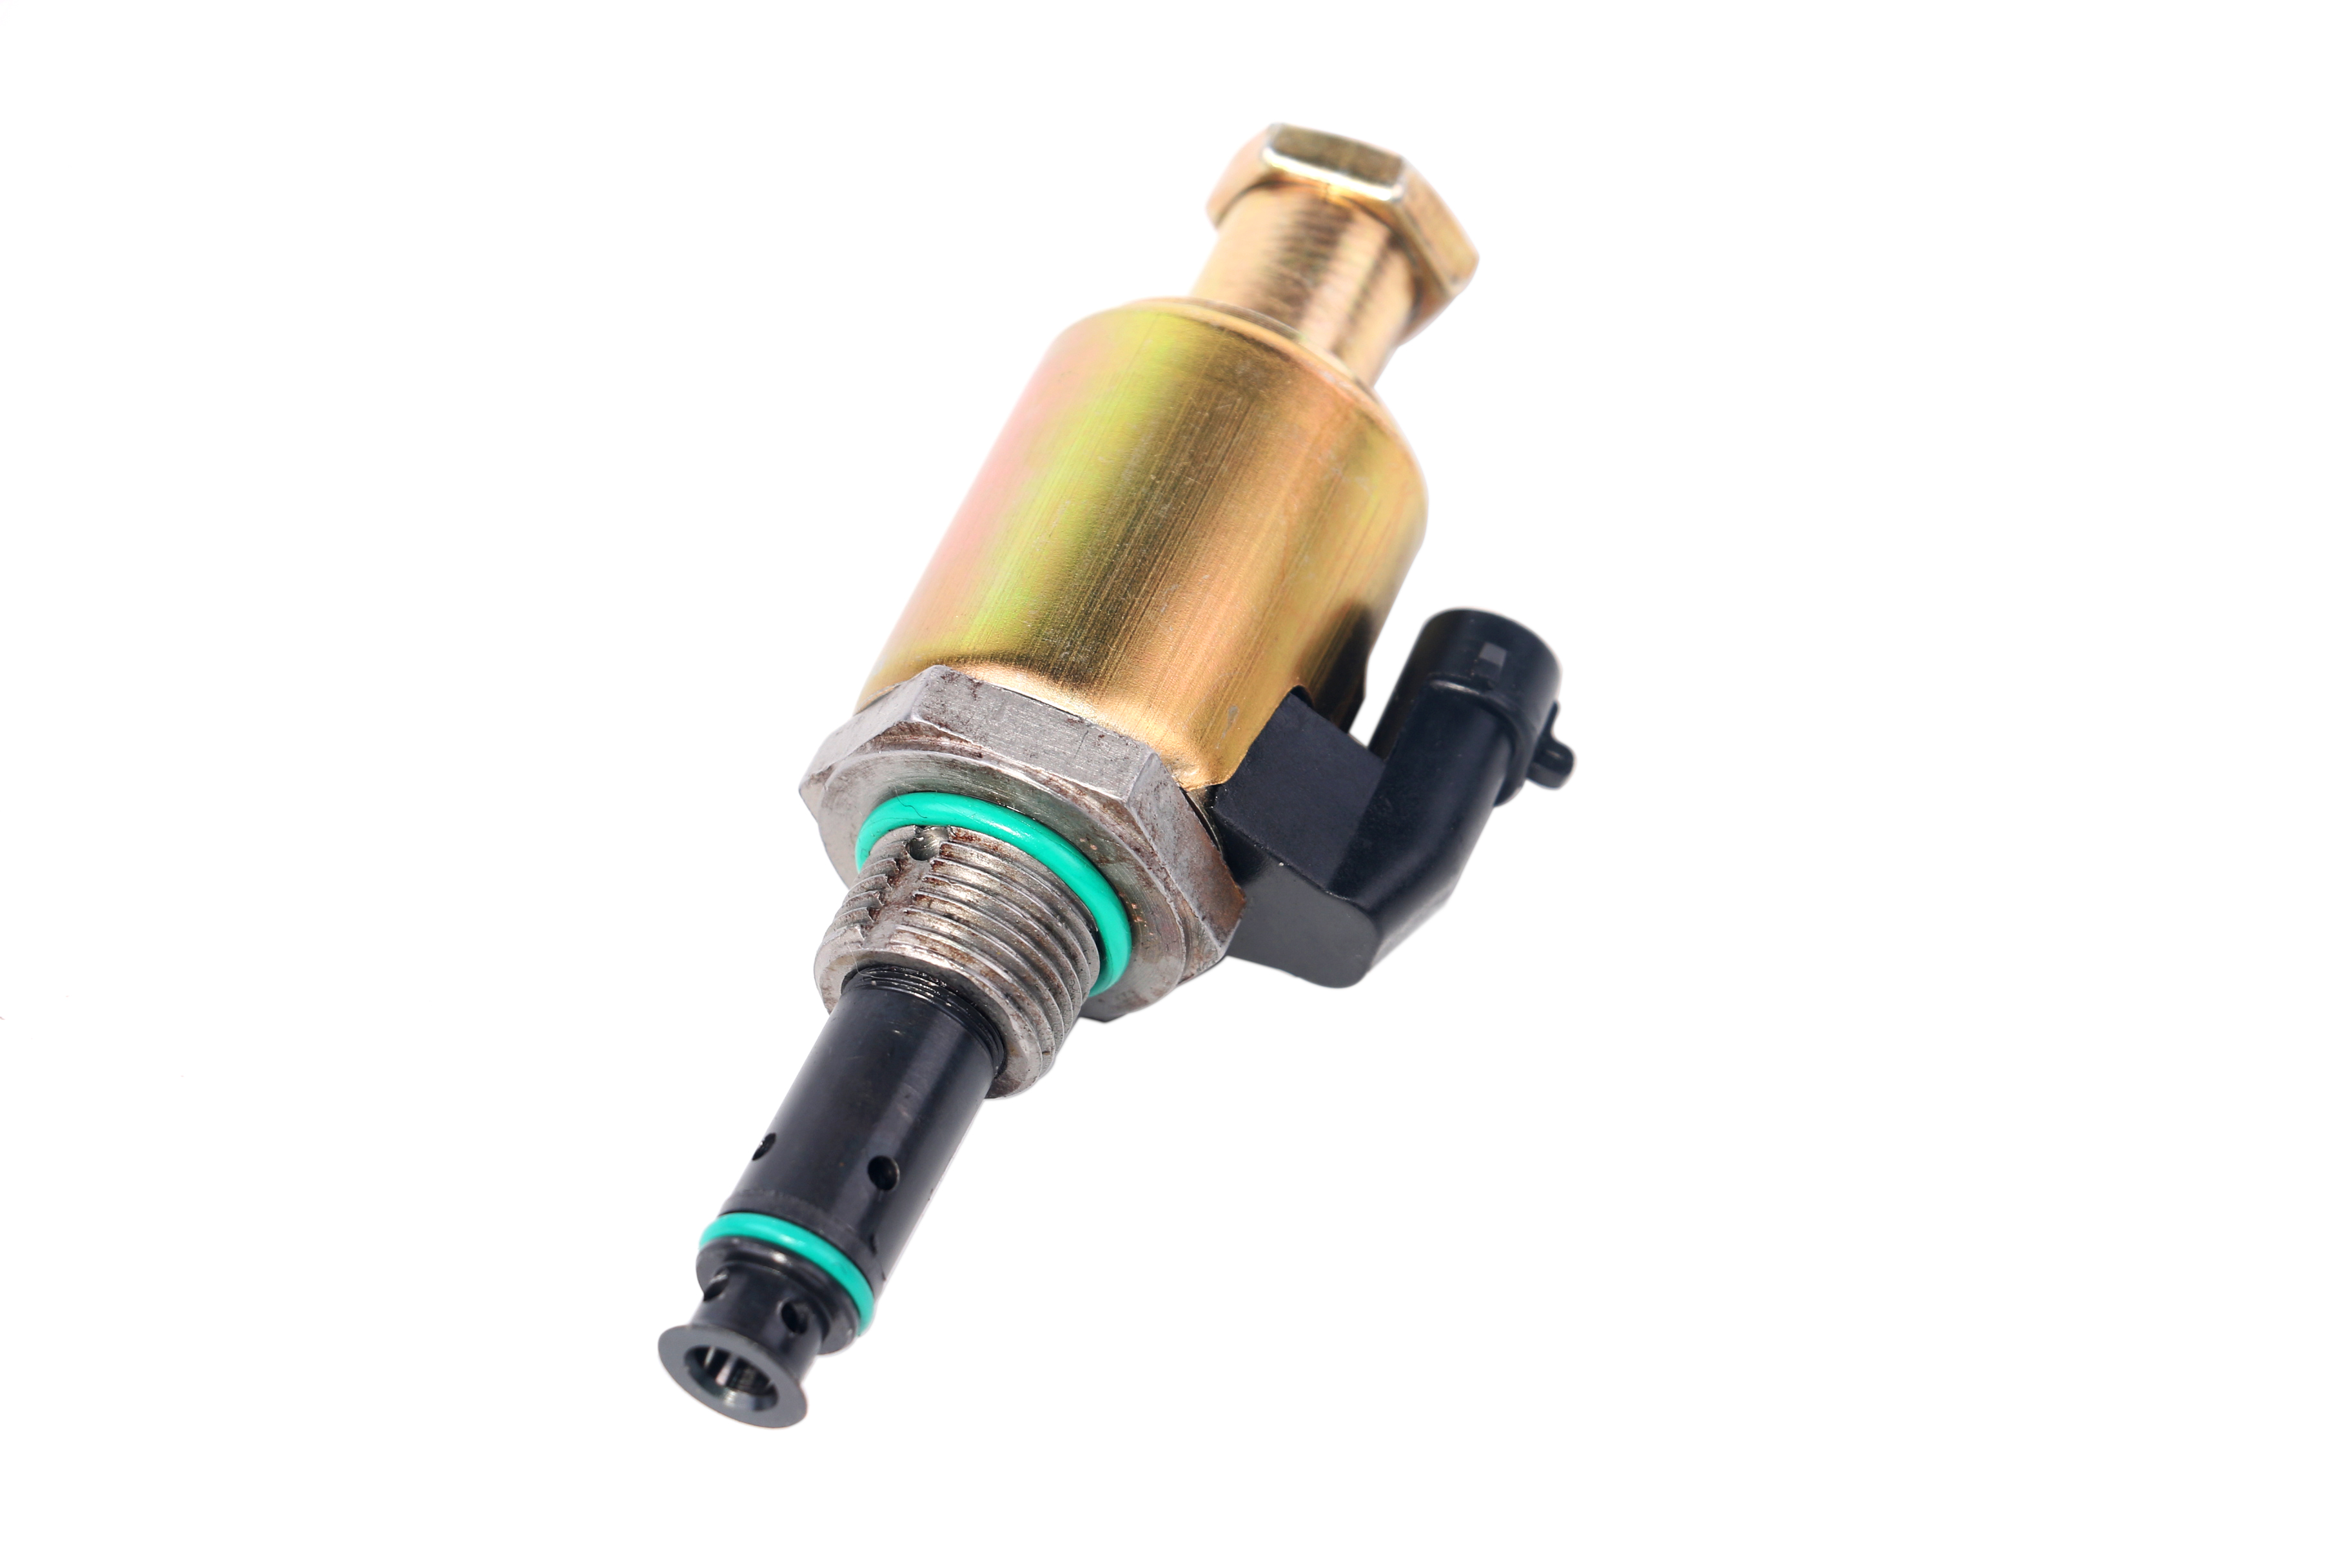 Injector Pressure Regulator Valve - IPR Valve - Fits Ford Powerstroke 7.3L - Replaces# F5TZ9C968A Image